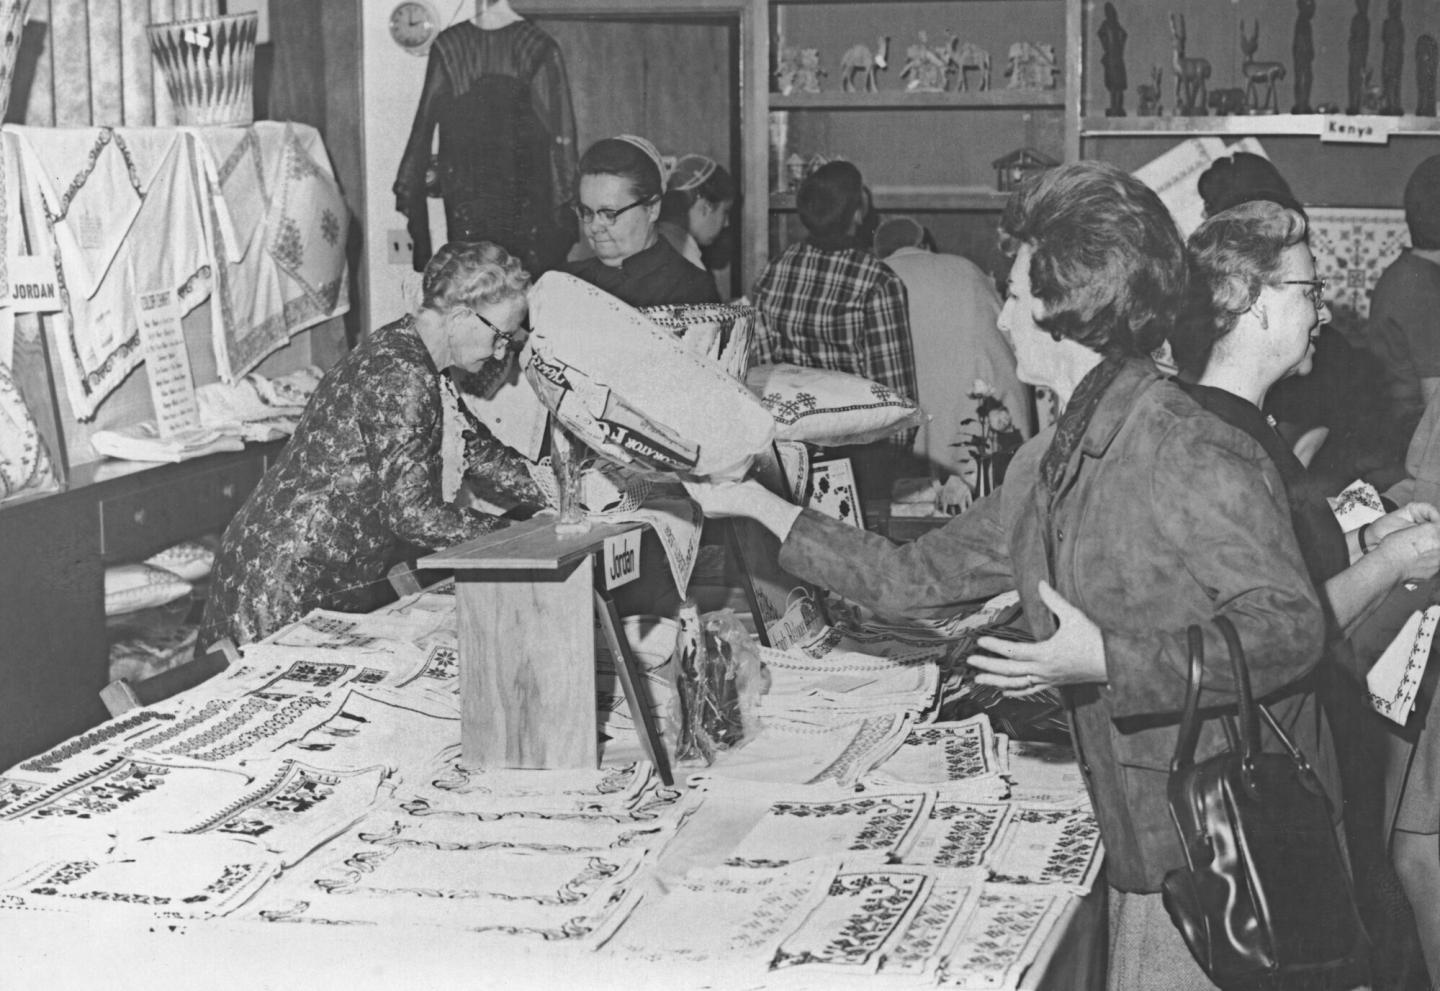 A black and white photo of women shopping at a craft store with Palestinian sewing on display